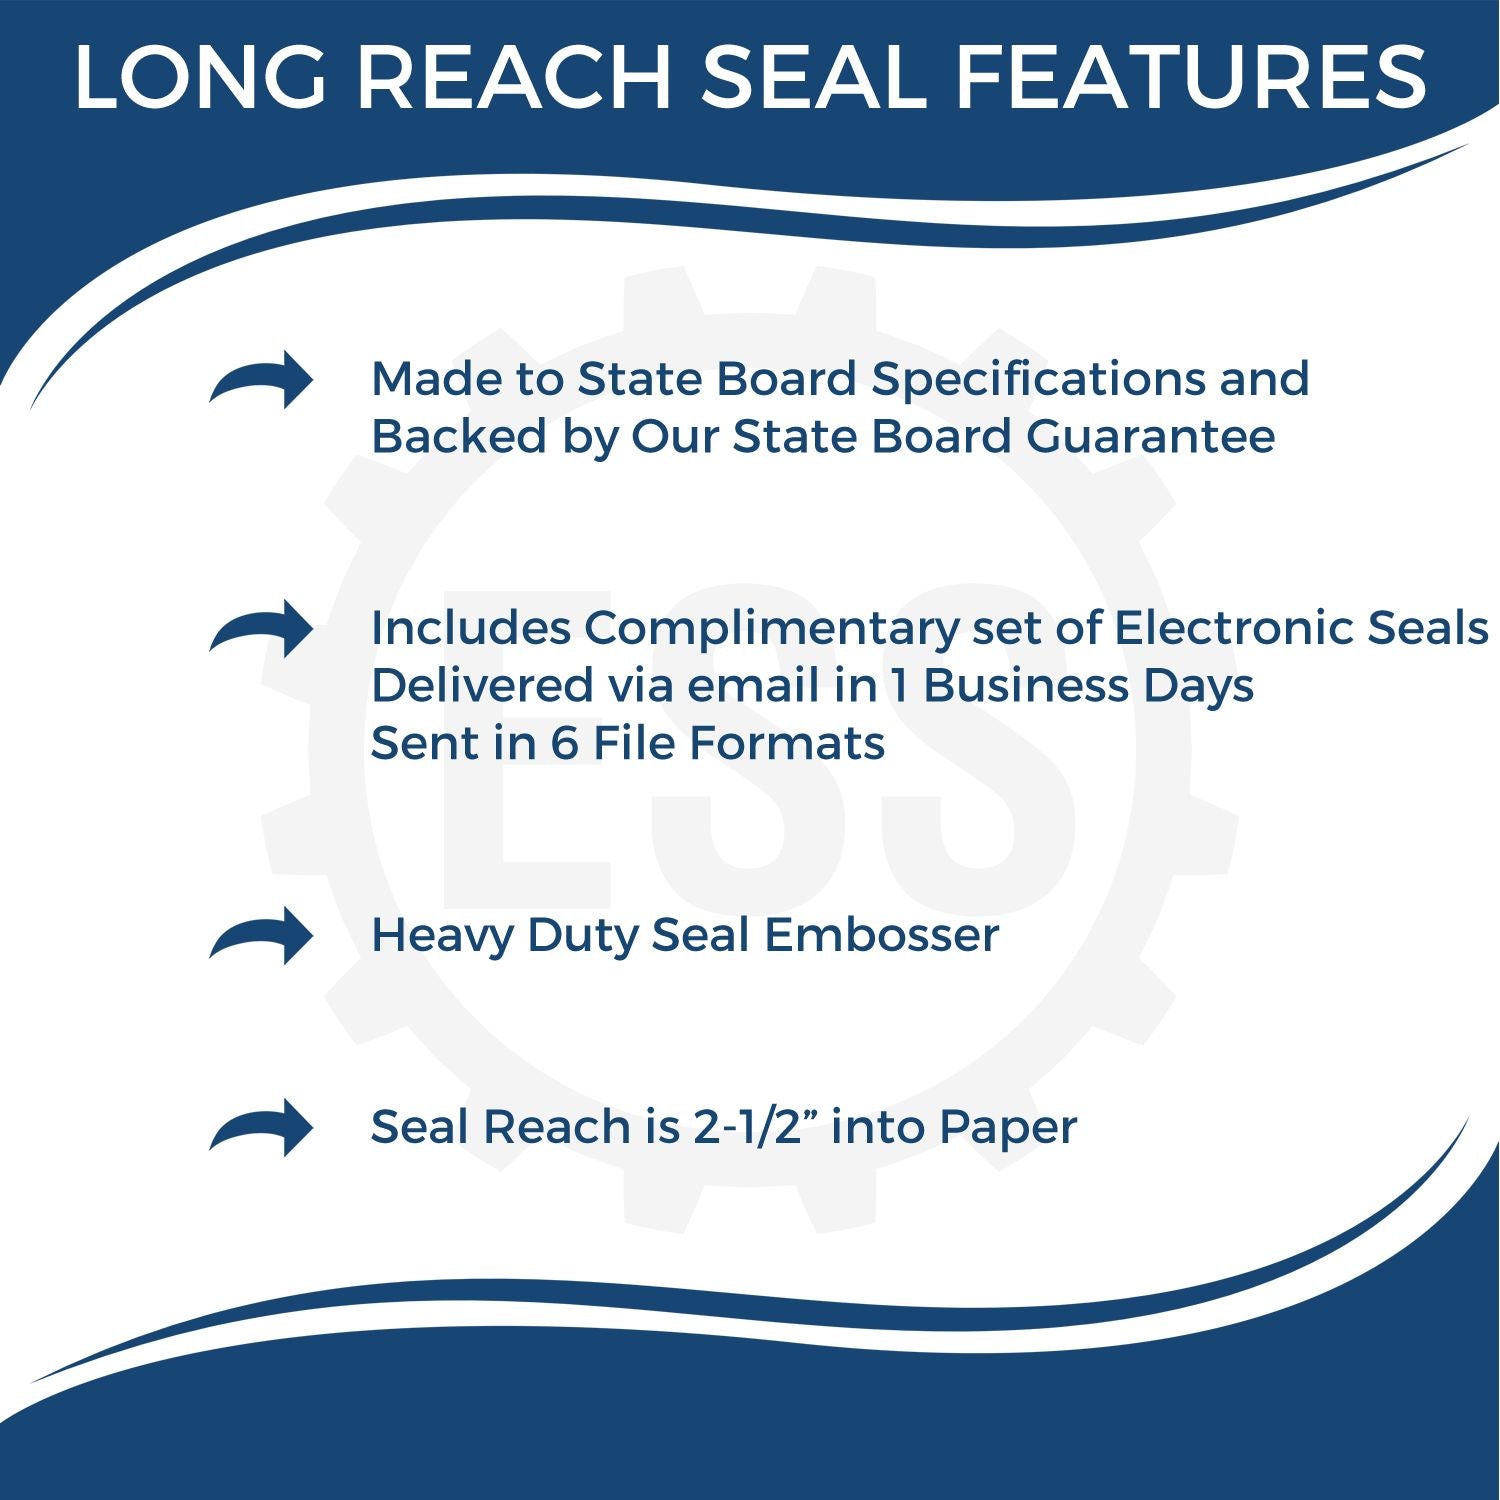 The main image for the Long Reach Minnesota PE Seal depicting a sample of the imprint and electronic files